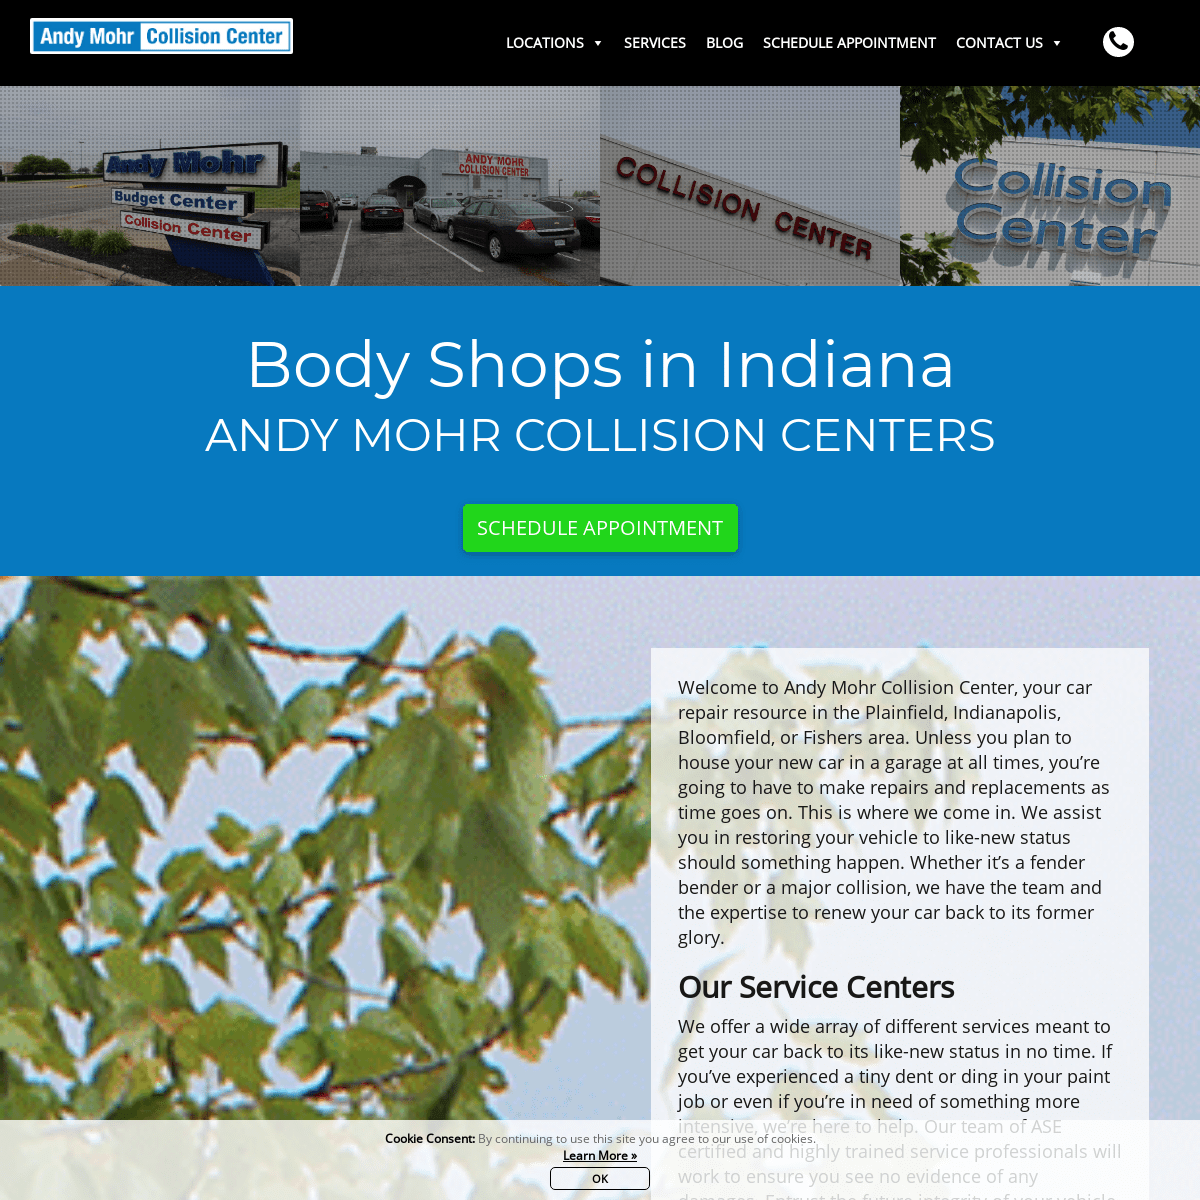 Body Shops in Indiana | Andy Mohr Collision Center